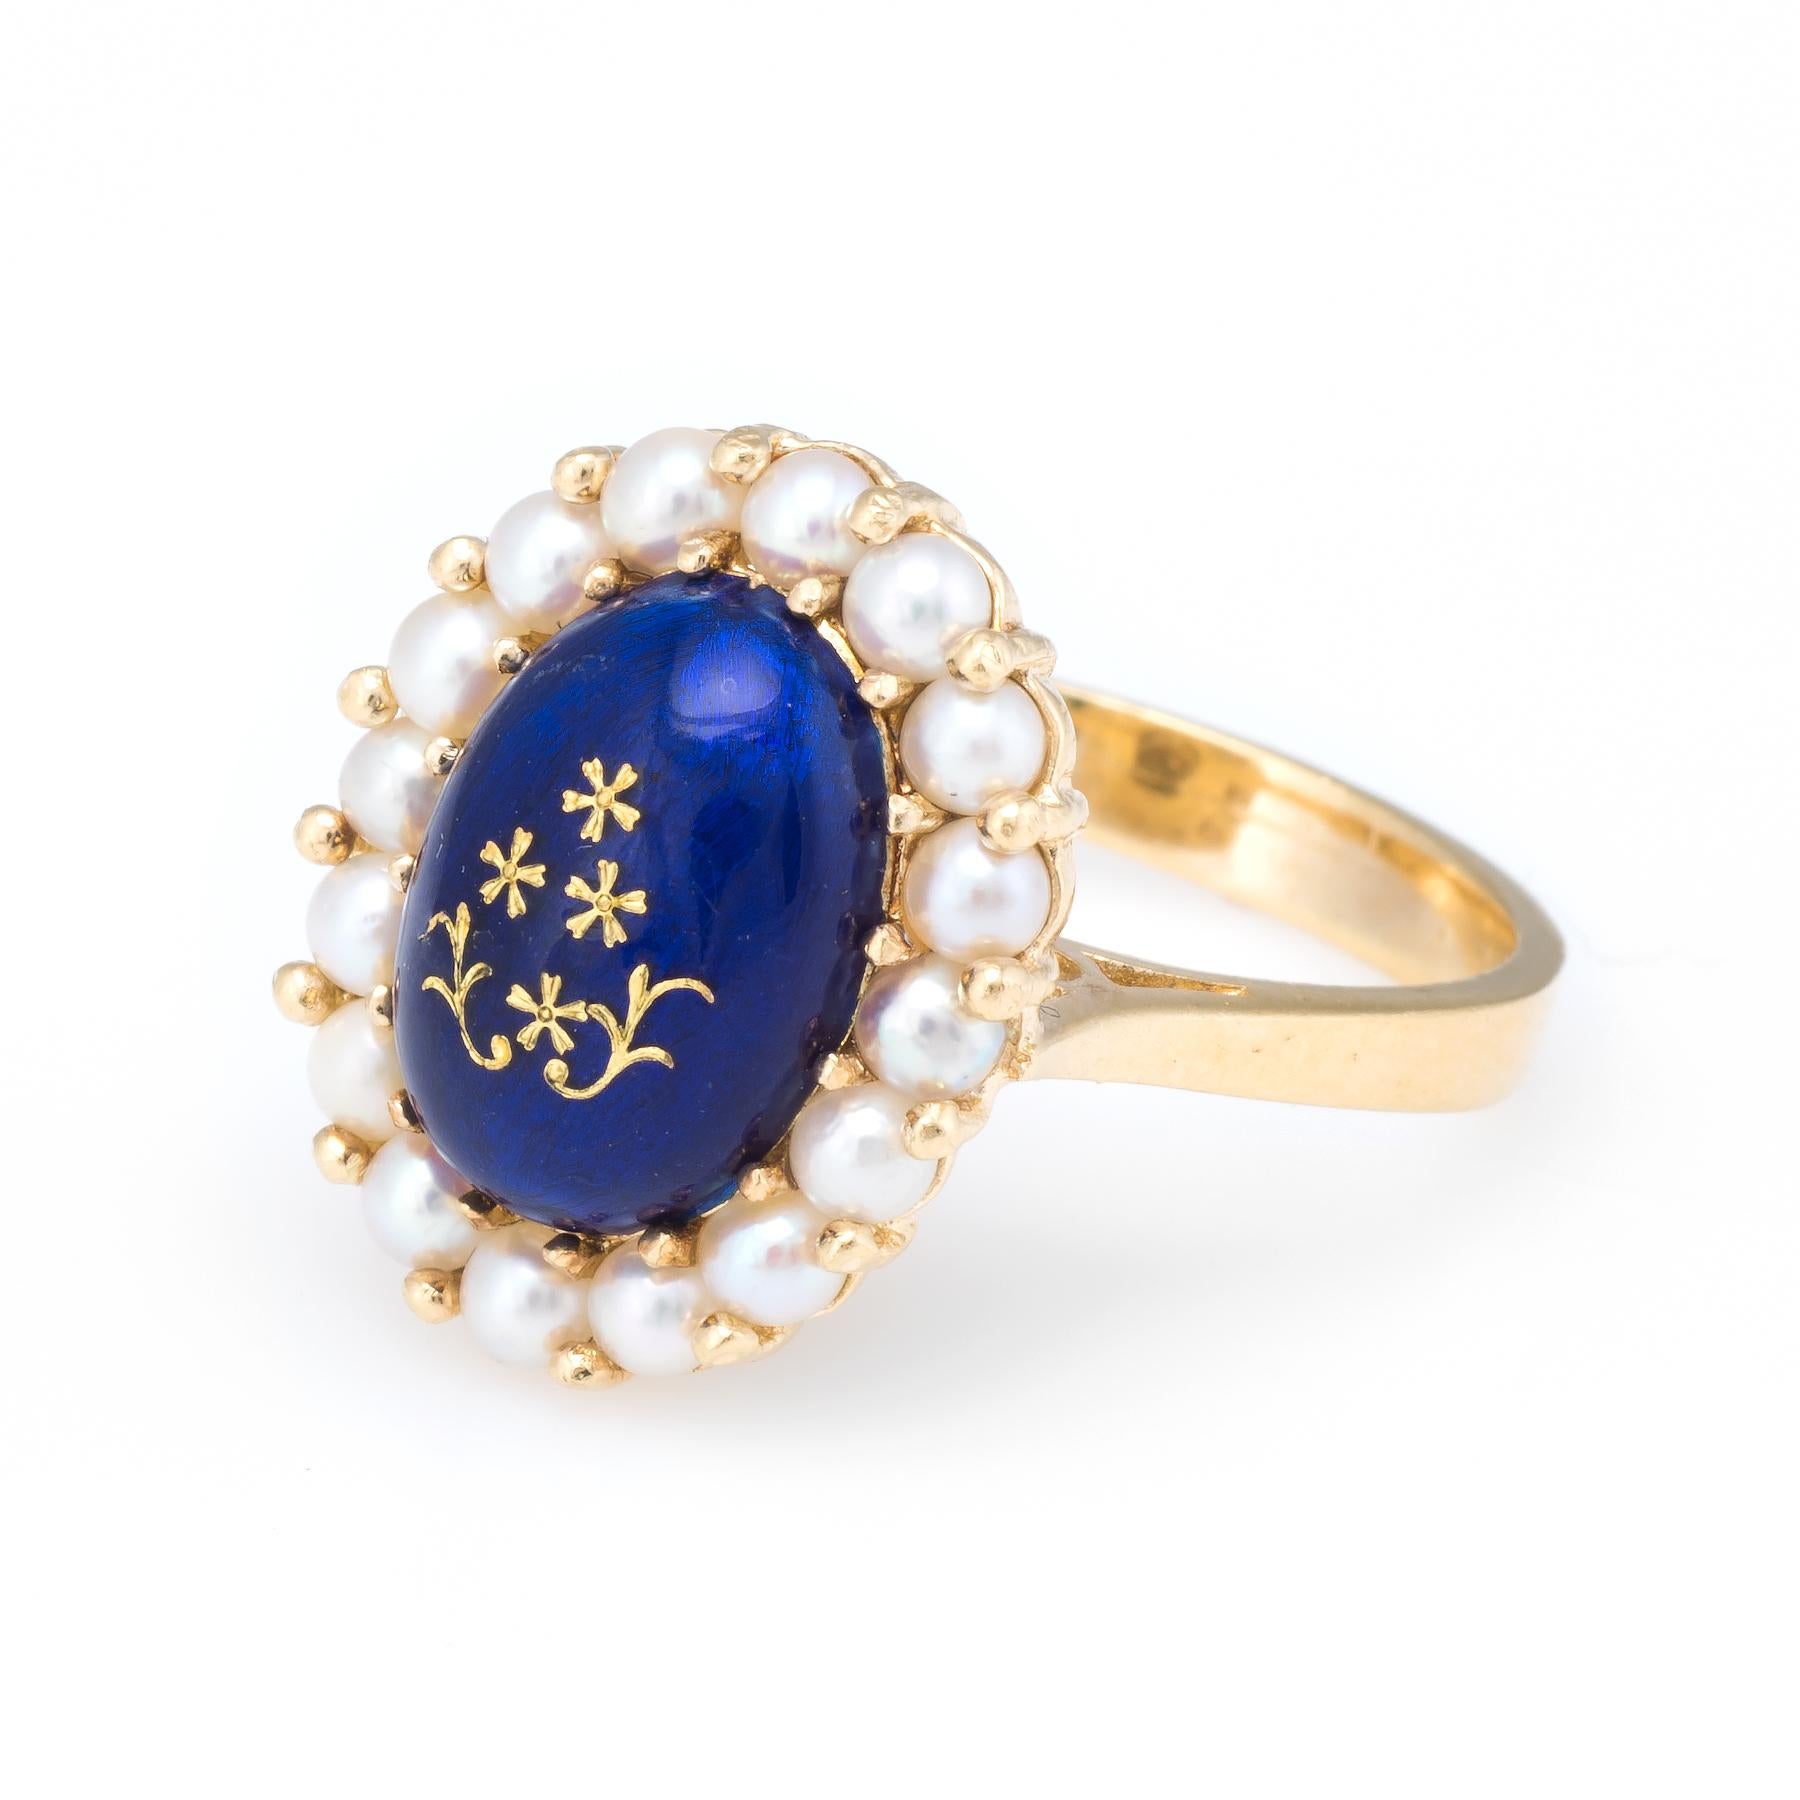 Round Cut Enamel Cultured Pearl Princess Cocktail Ring Vintage 18k Yellow Gold Estate Fine